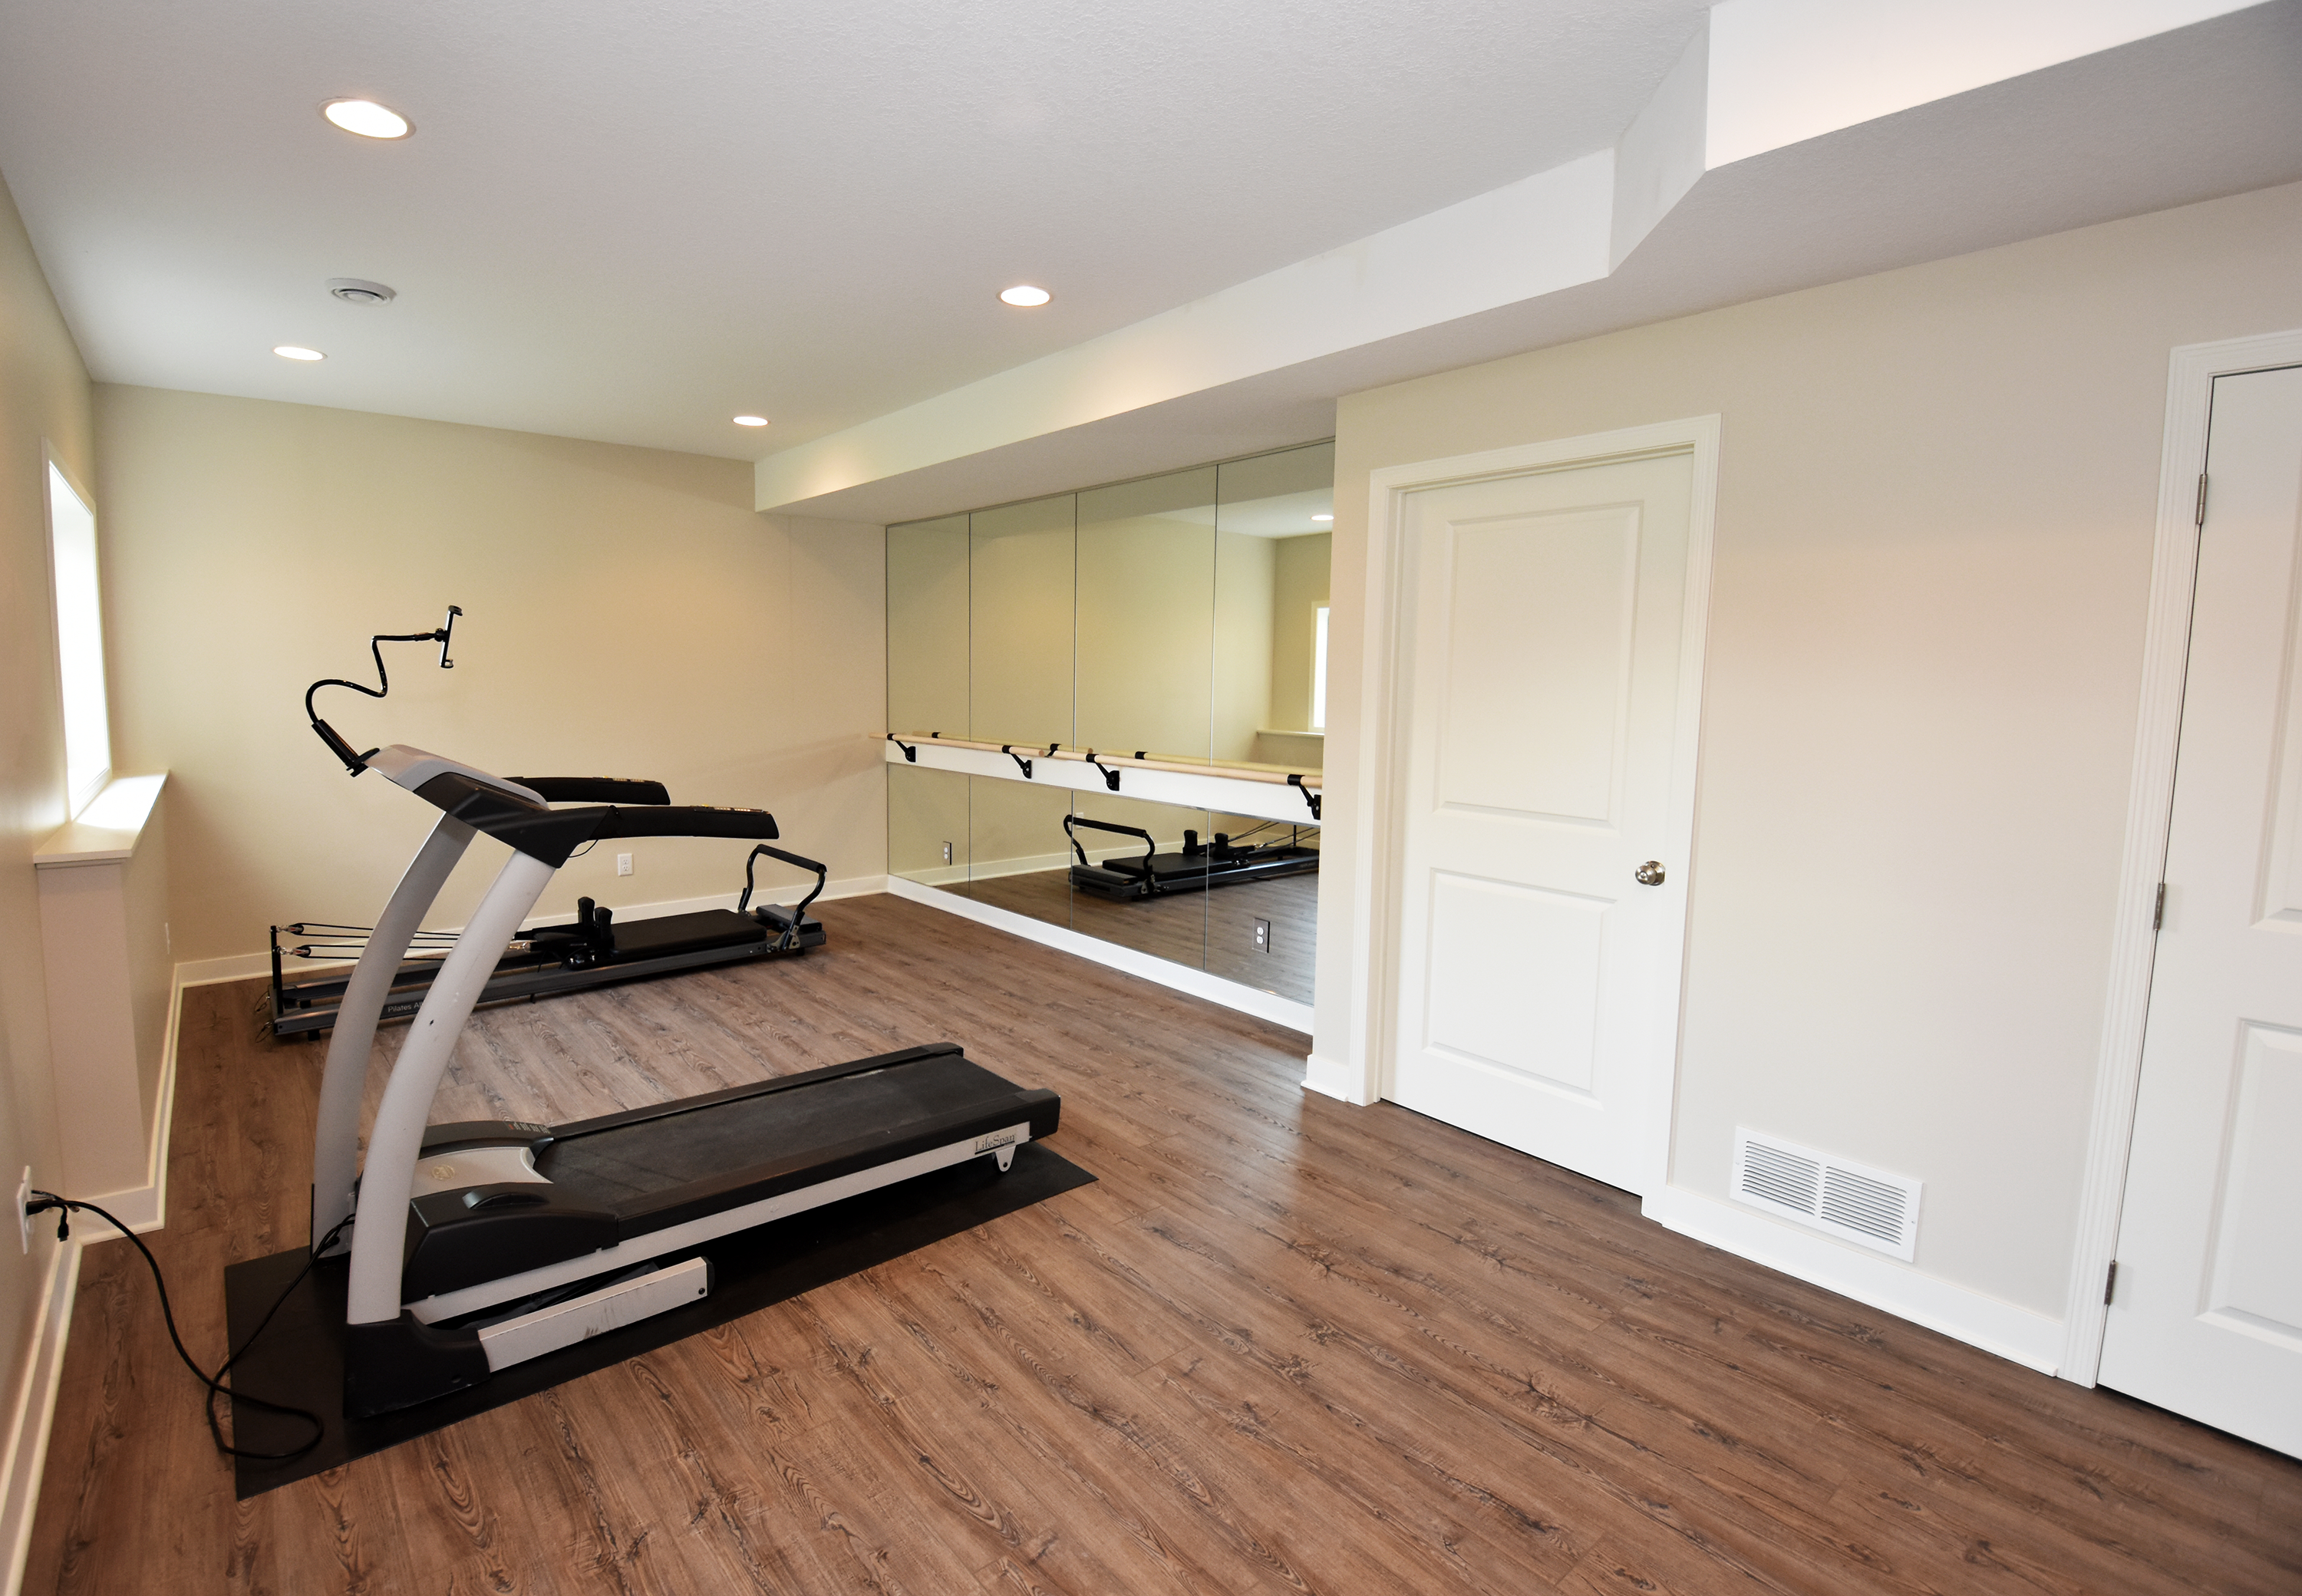 Basement home gym - exercise equipment - large mirror